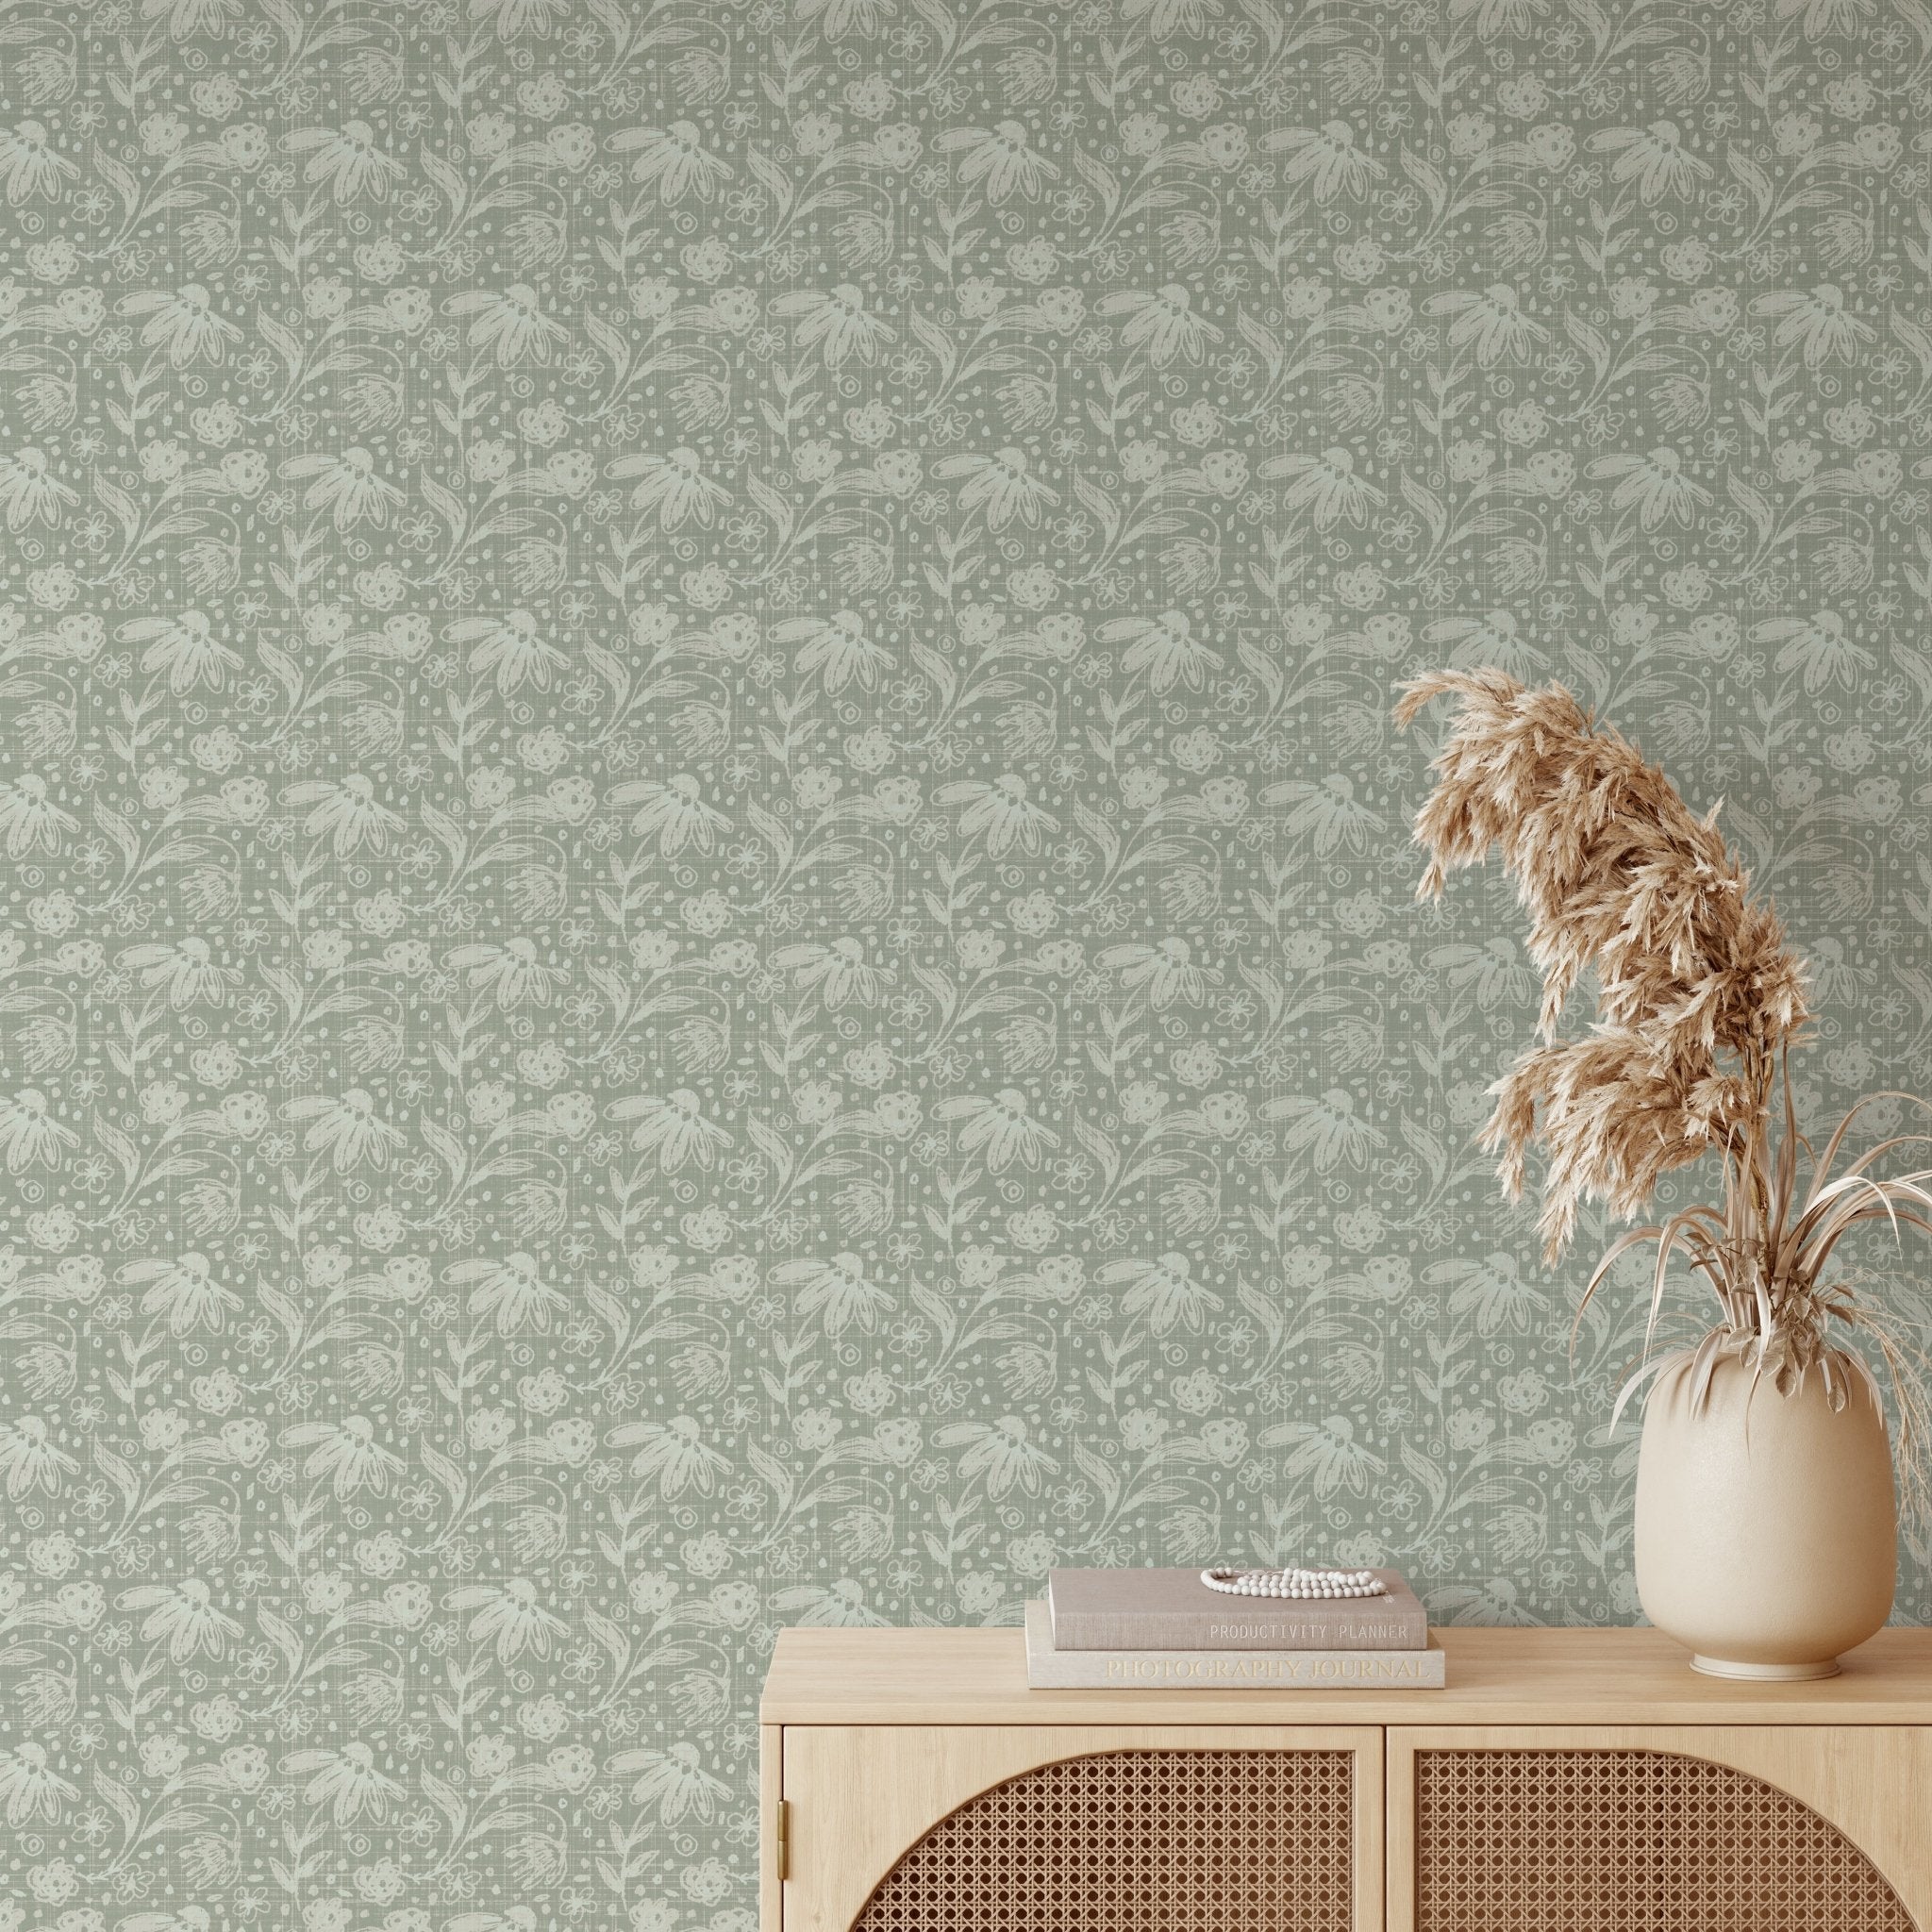 Lichen Green Peel and Stick Removable Wallpapers